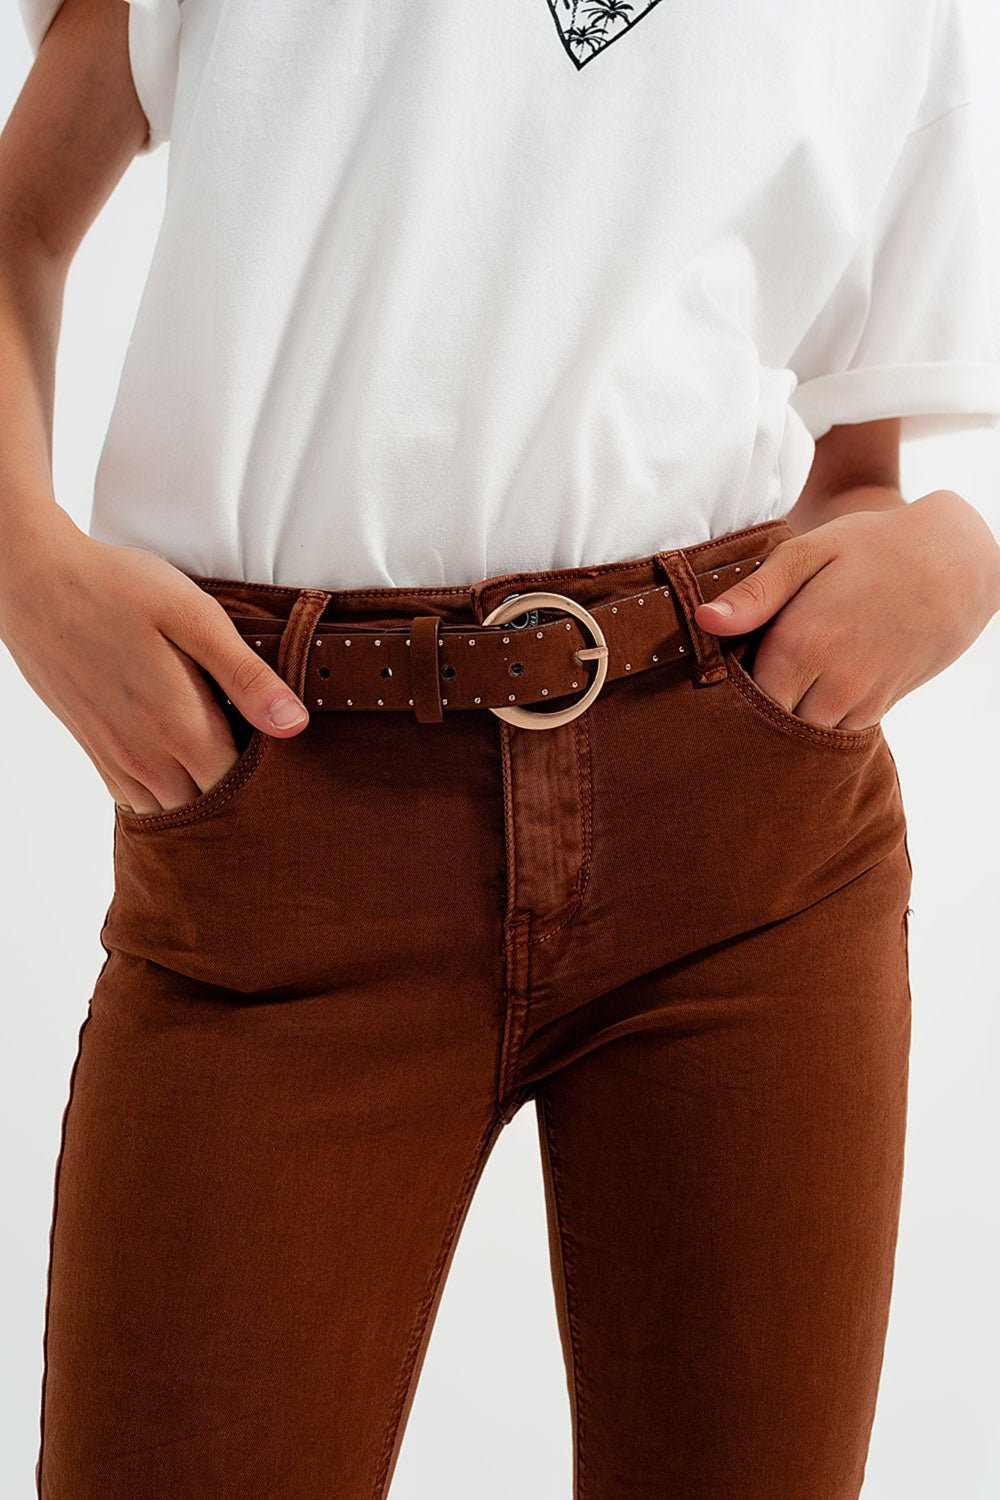 High Waisted Super Skinny Pants in CamelK&F